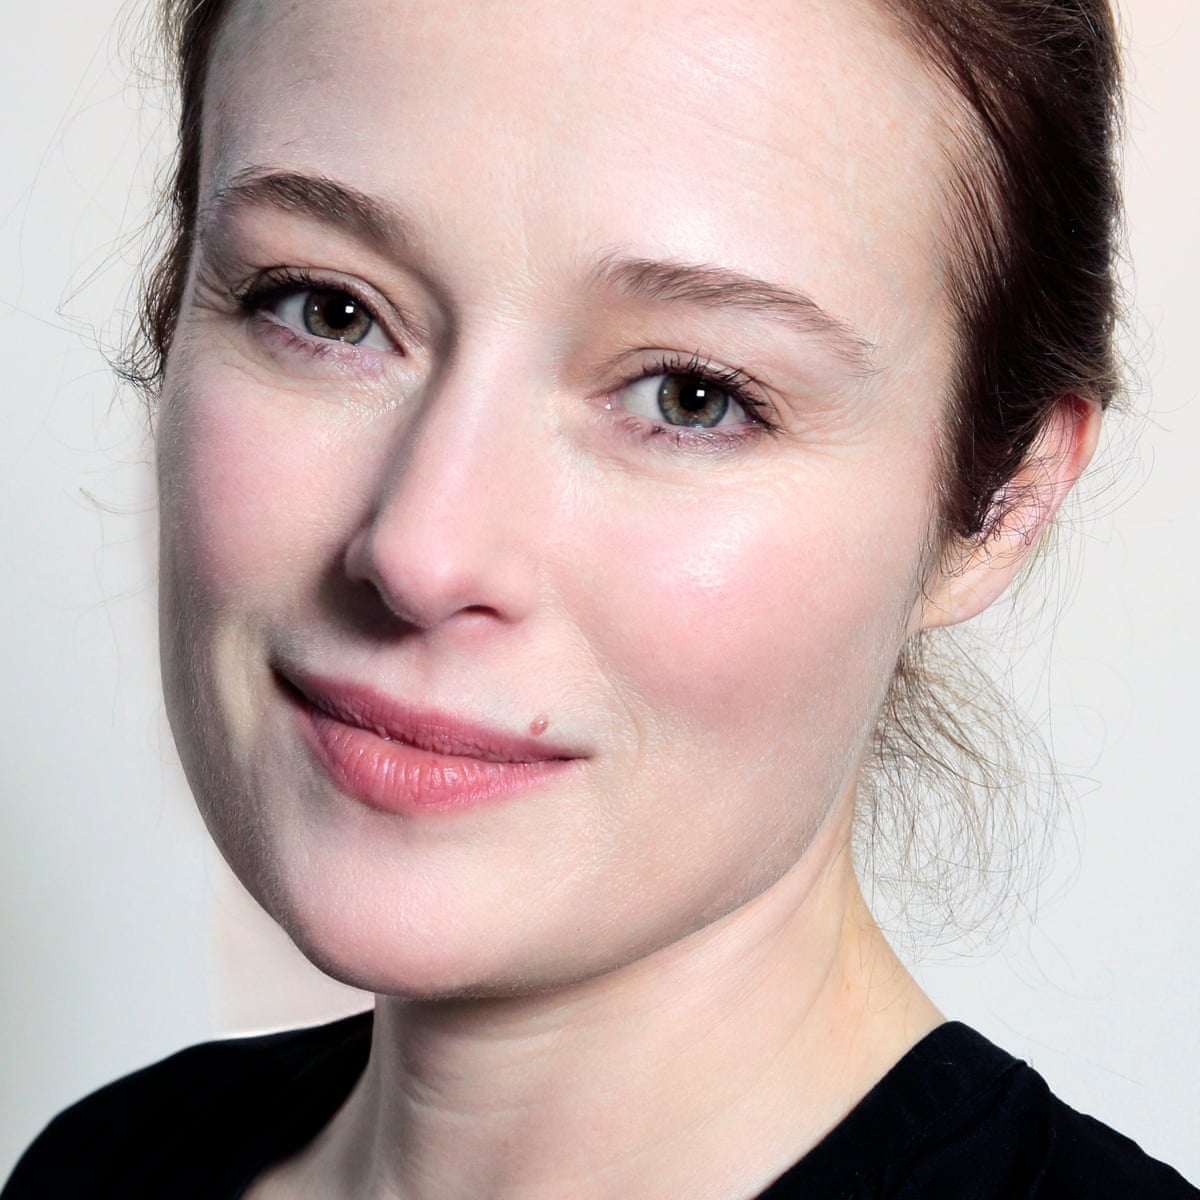 Pictures of jennifer ehle